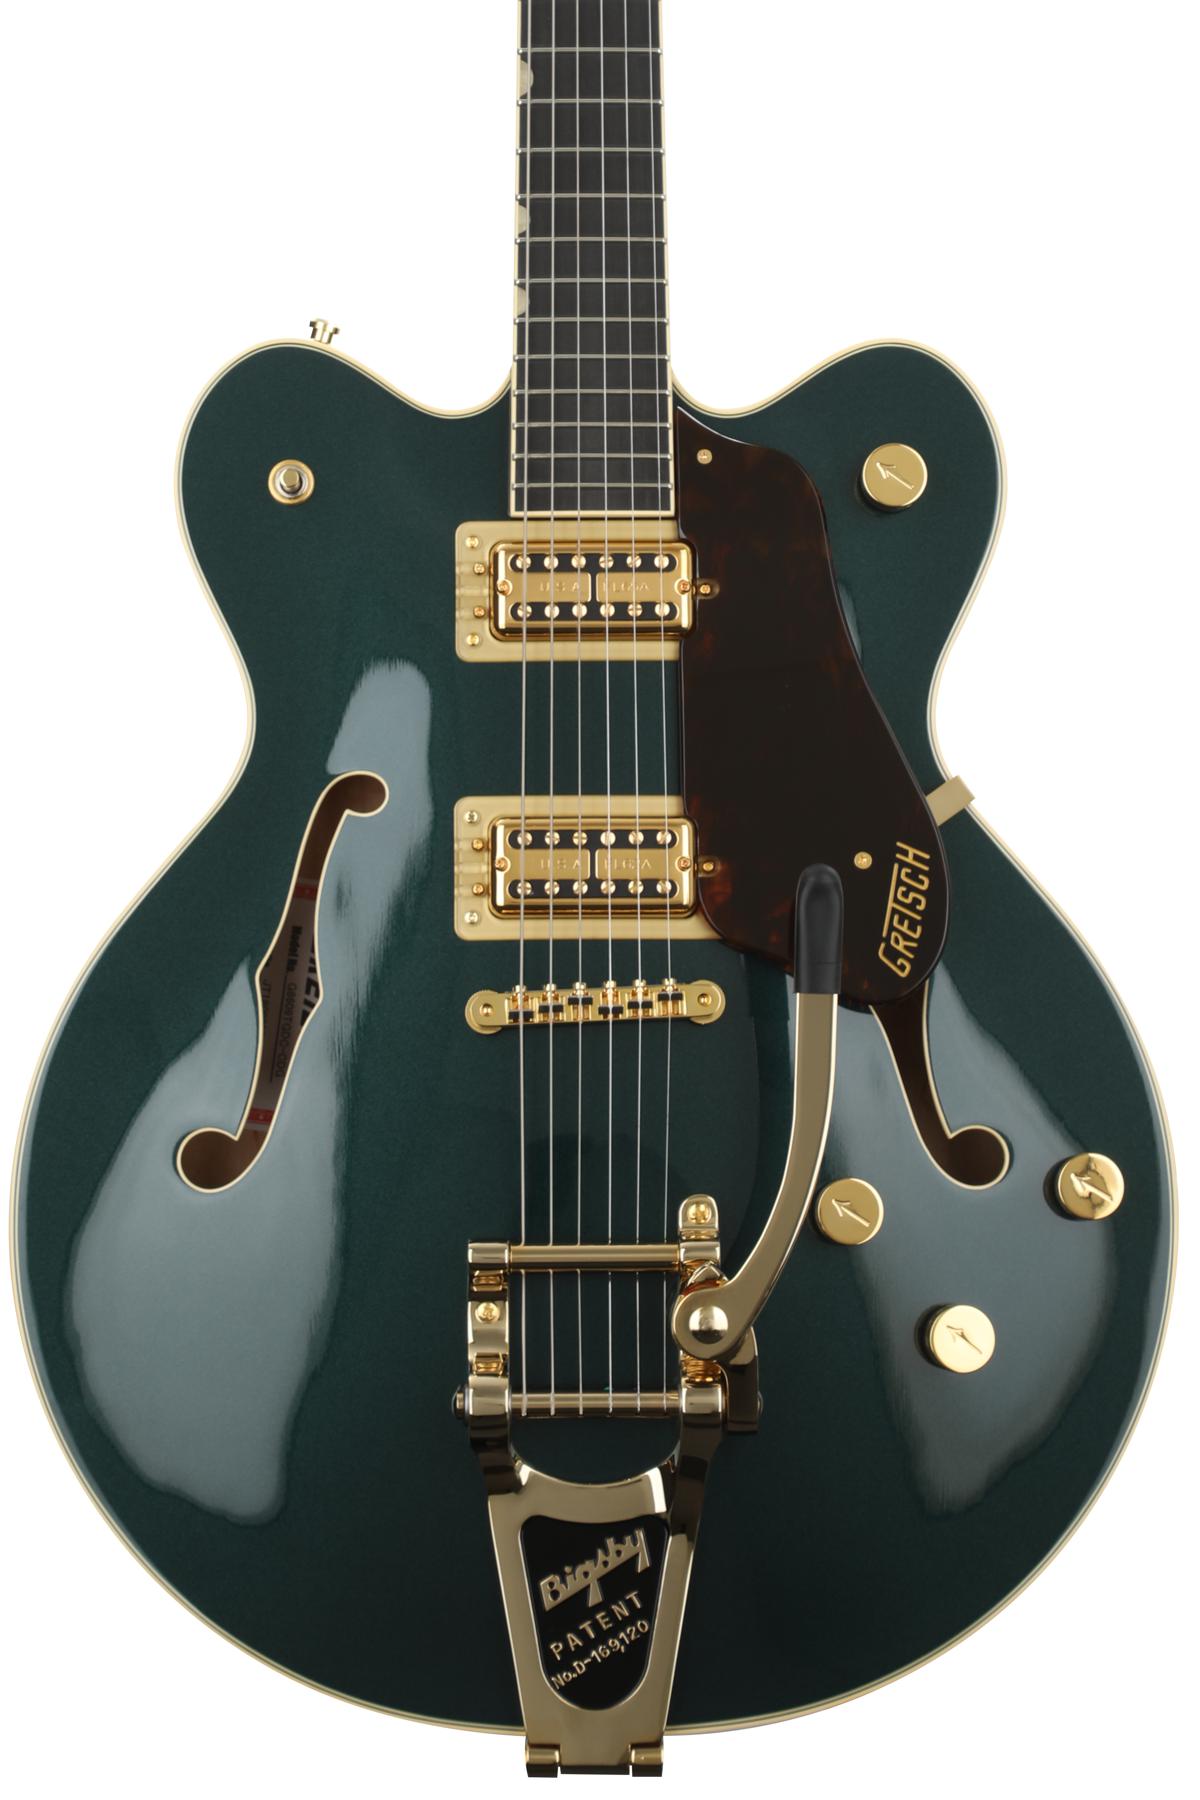 Gretsch G6609TDC Players Edition Broadkaster Center Block - Cadillac Green,  Bigsby Tailpiece